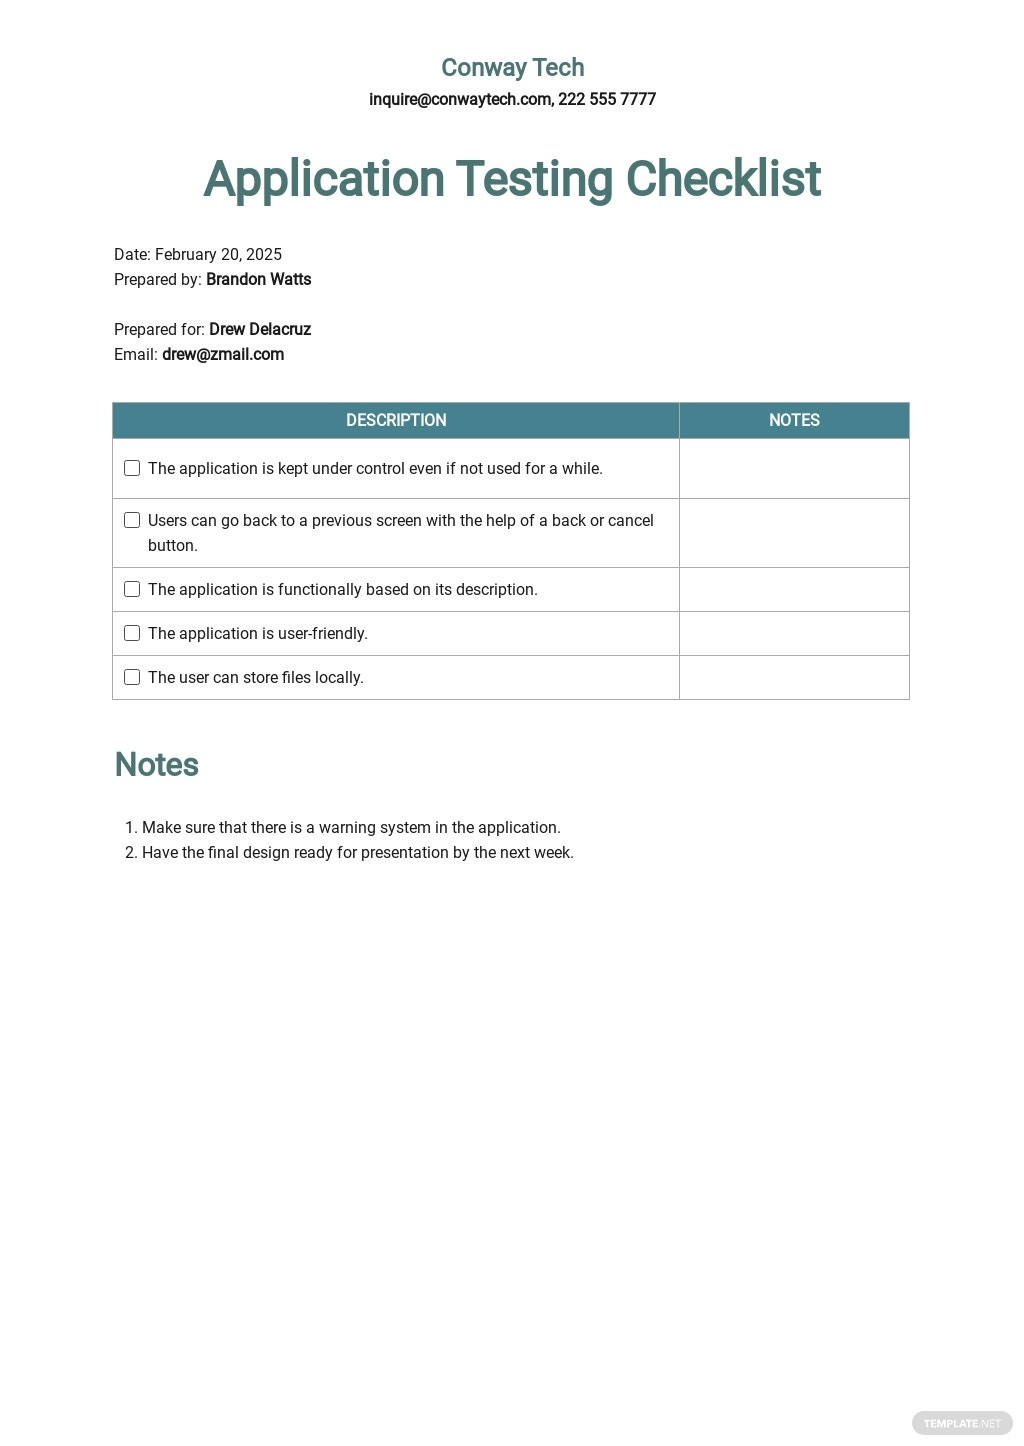 Application Testing Checklist Template [Free PDF] - Google Docs  With Regard To Application Testing Checklist Template Intended For Application Testing Checklist Template